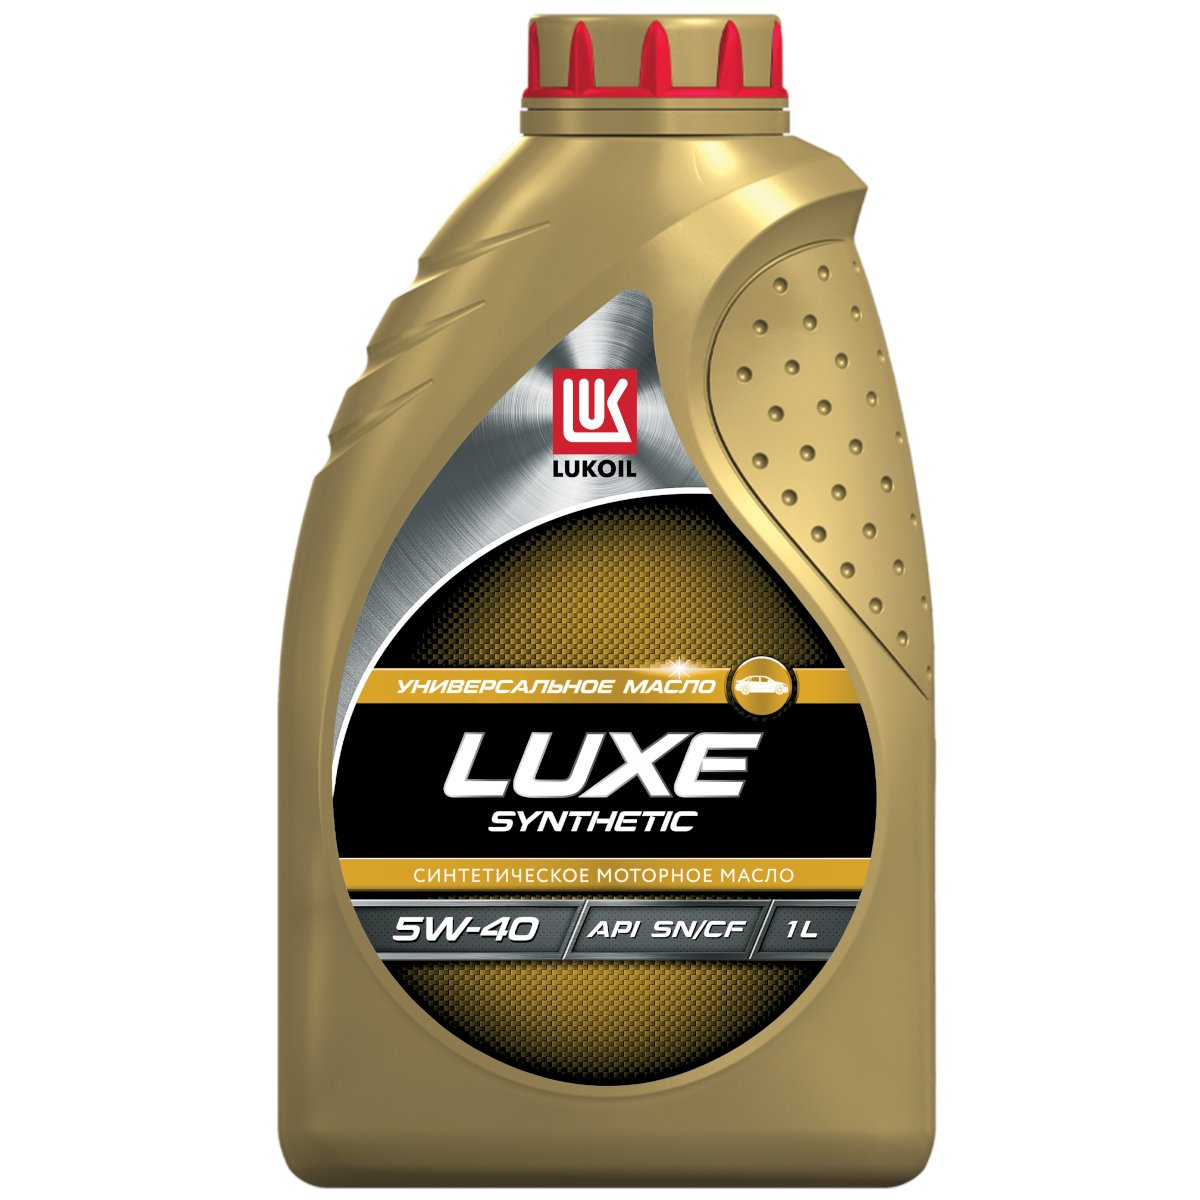 Масло моторное Лукойл Luxe Synthetic 5W-40 SN/CF 1л